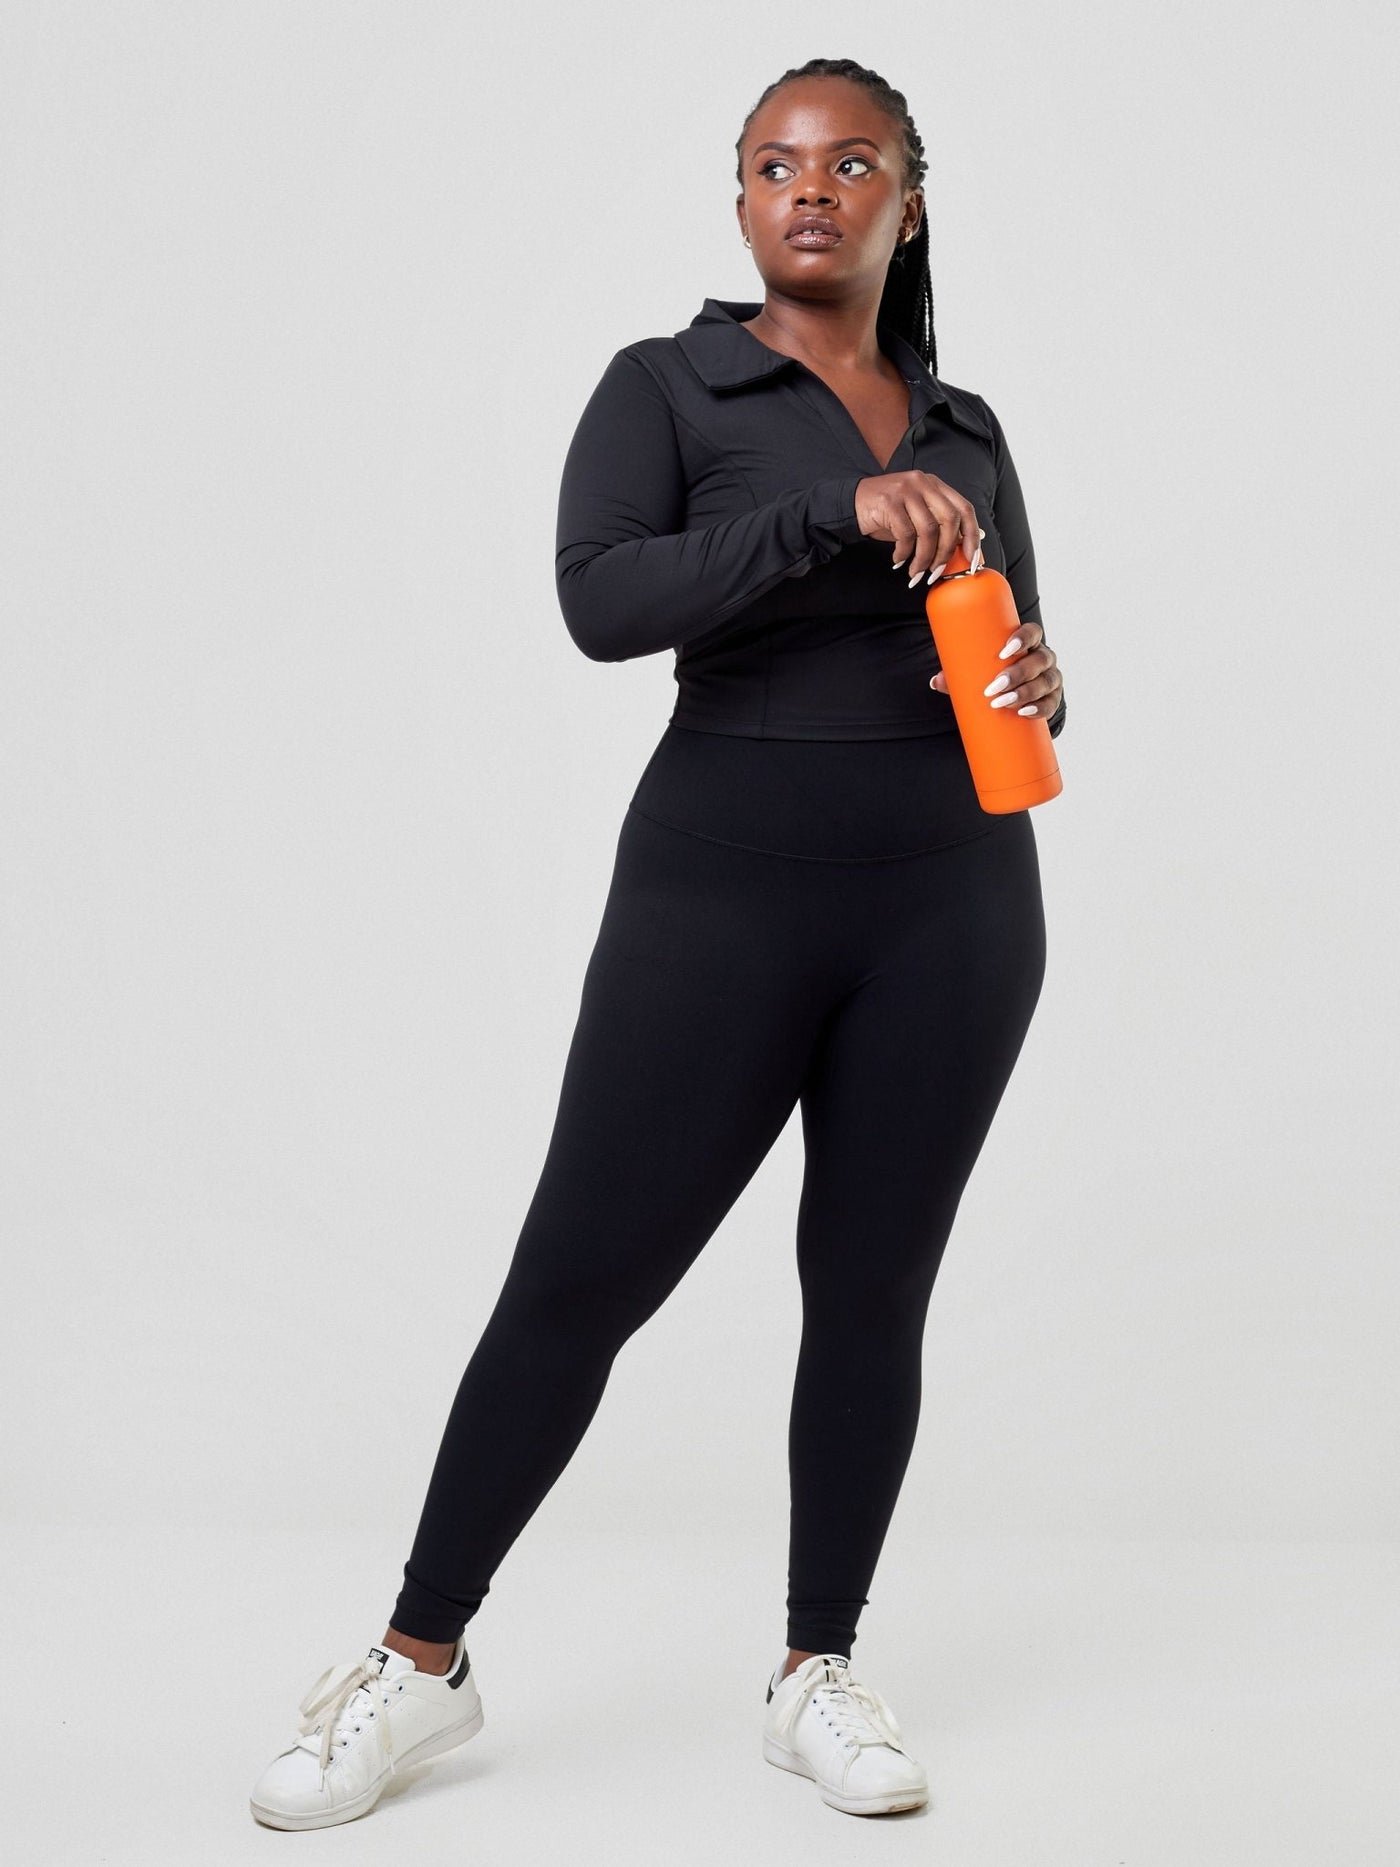 Ava Fitness Cambridge Long Sleeved Fitted Top - Black - Shopzetu